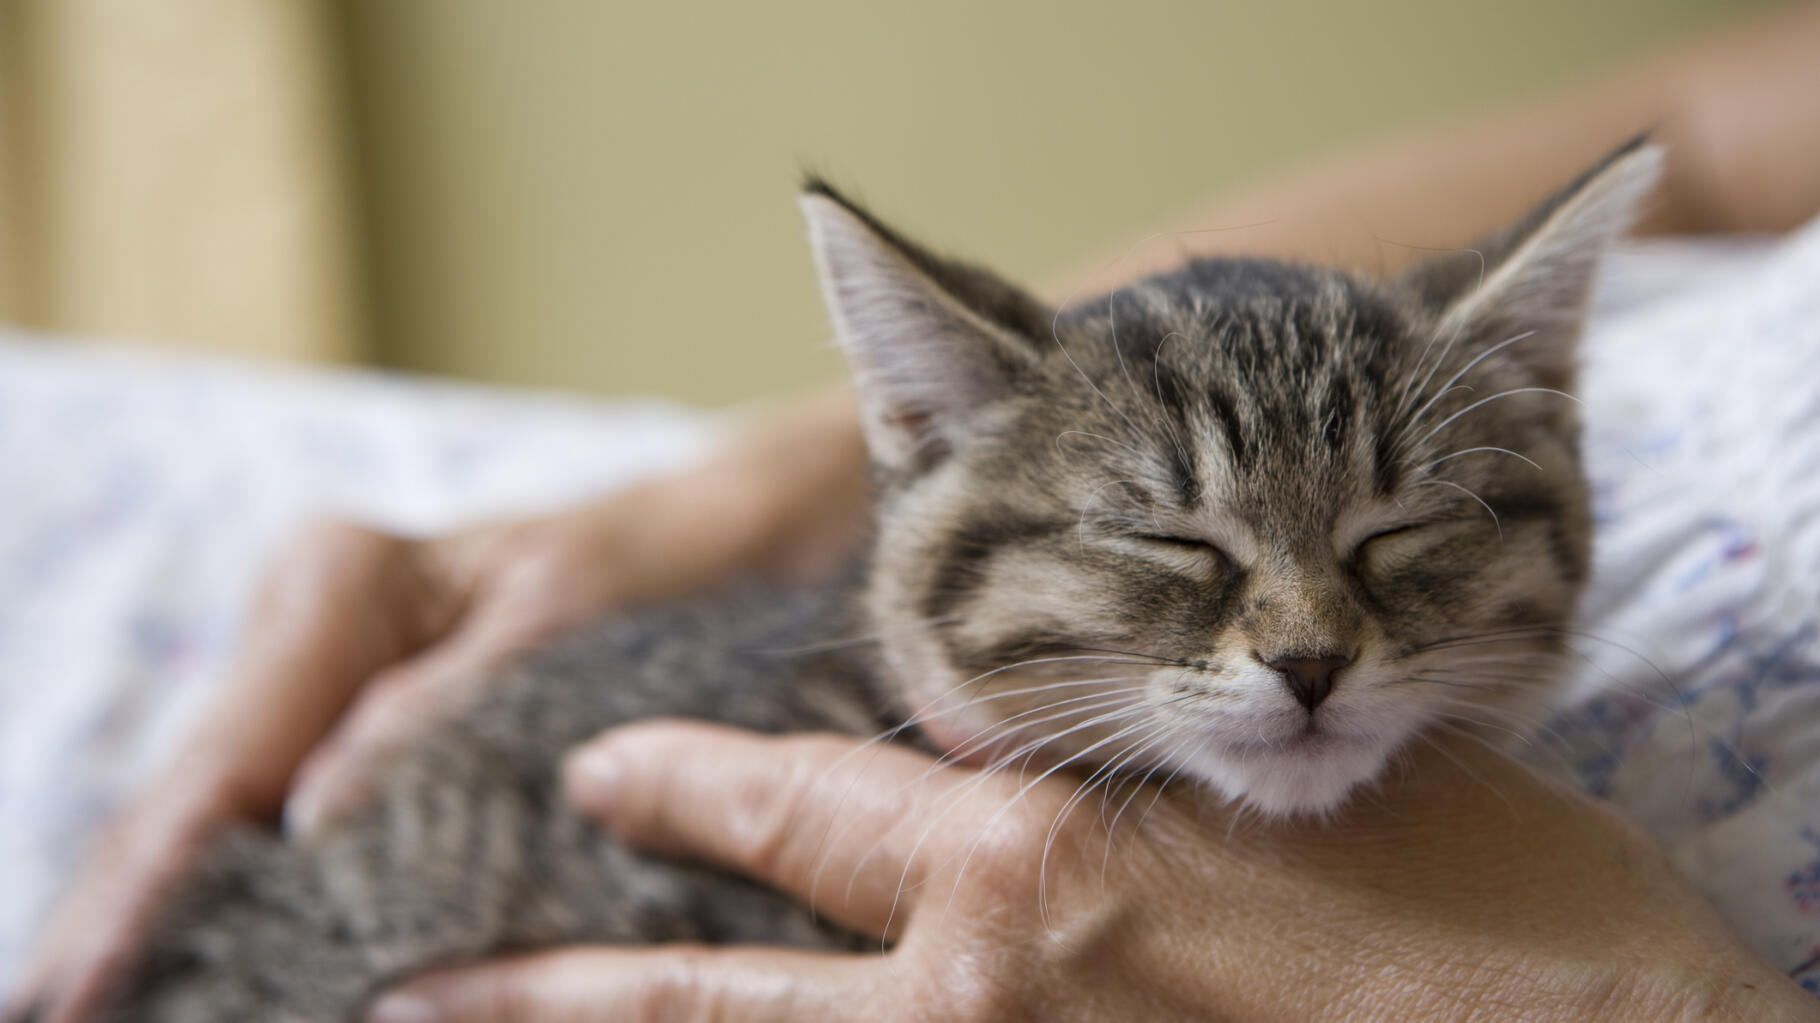 Why do cats purr?  Scientists have an explanation